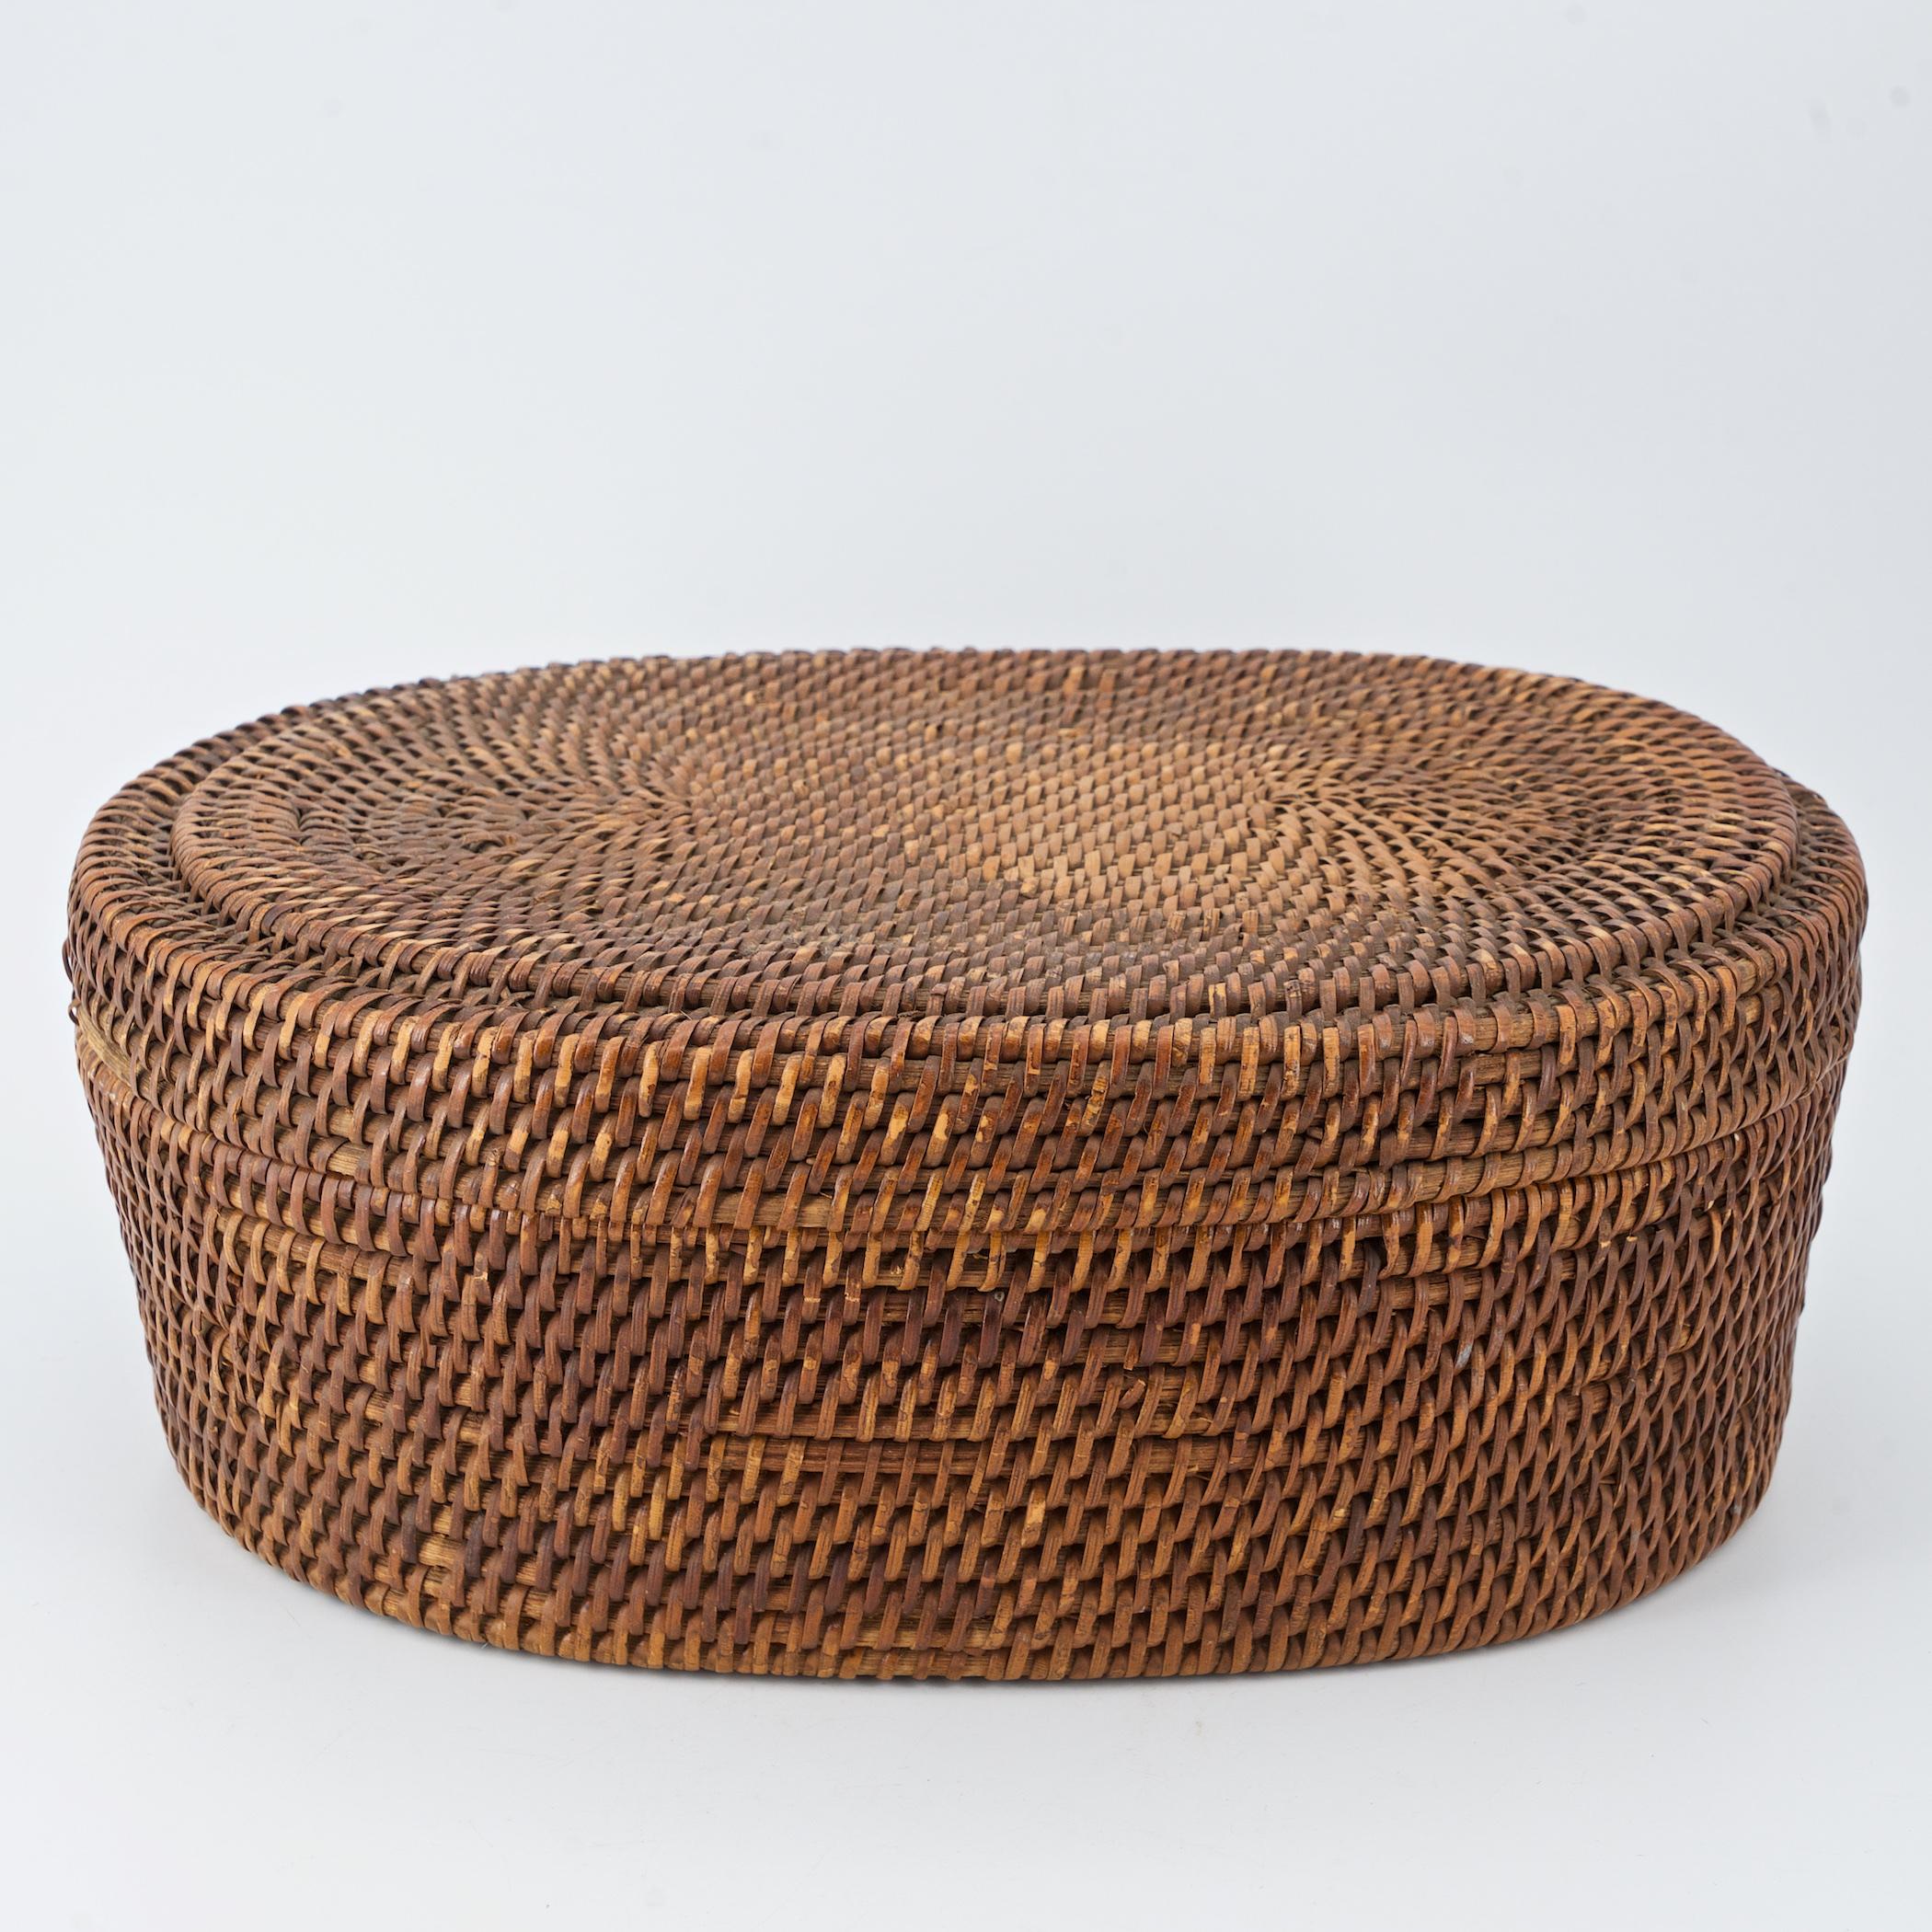 20th Century Native American Indian Woven Coiled Lidded Oval Basket